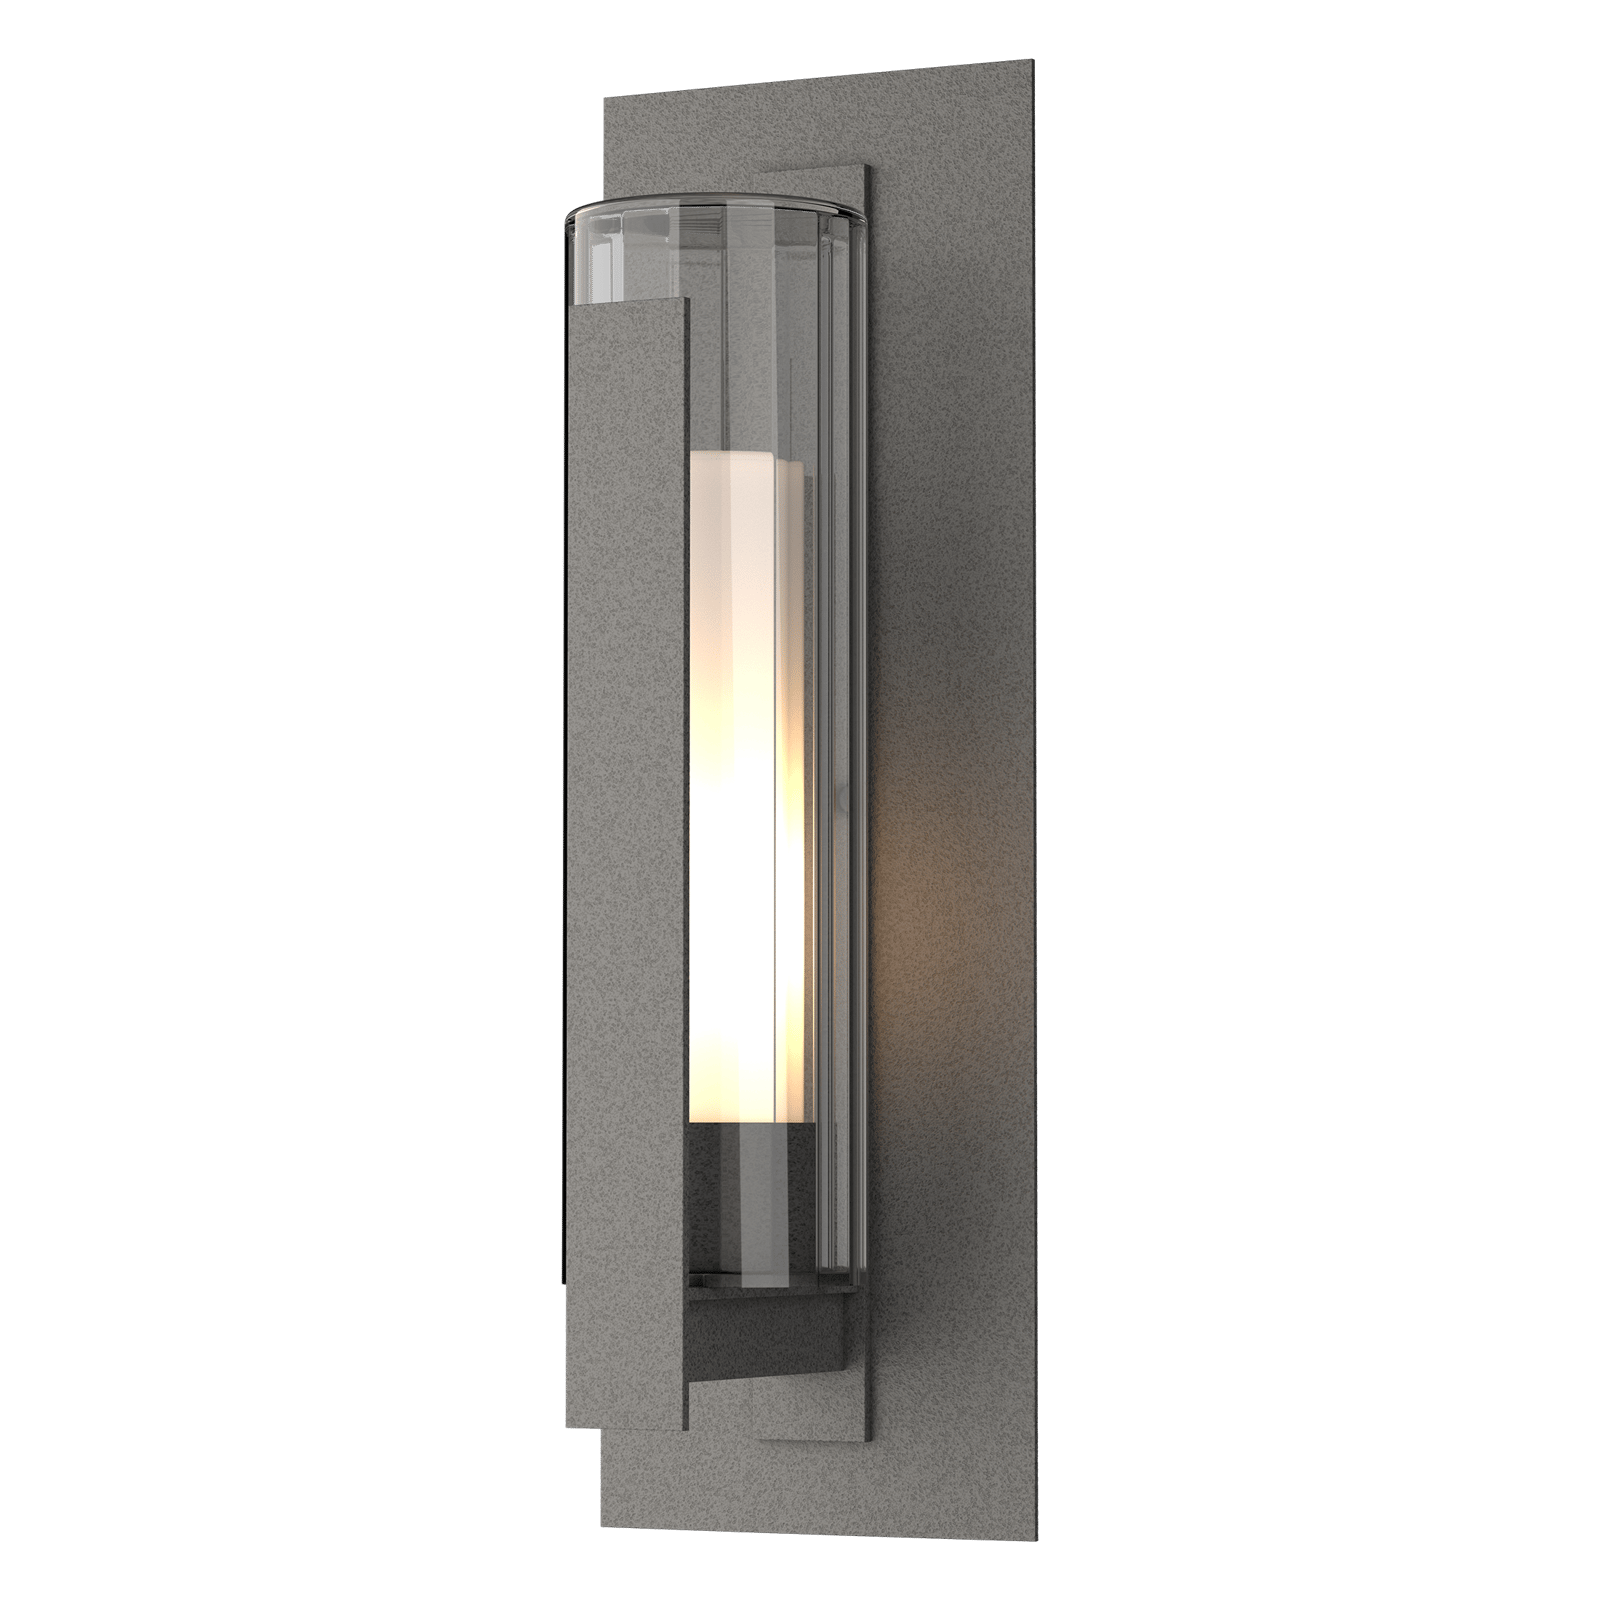 Hubbardton Forge Vertical Bar Fluted Glass Large Outdoor Sconce Outdoor l Wall Hubbardton Forge Coastal Natural Iron Clear Glass with Opal Diffuser (ZU) 